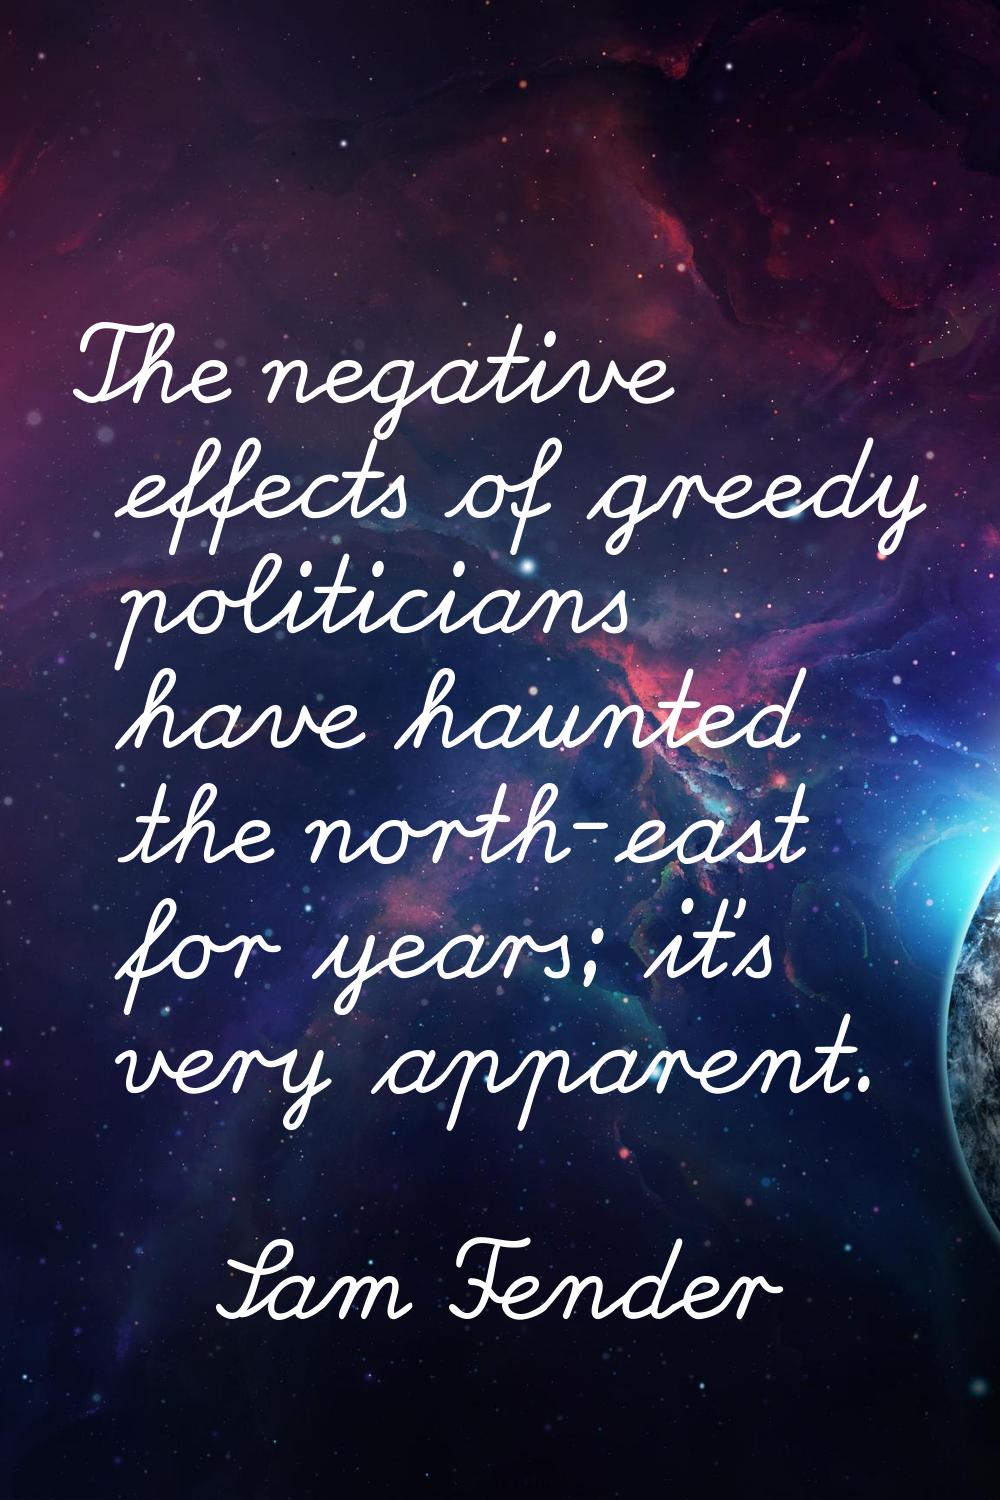 The negative effects of greedy politicians have haunted the north-east for years; it's very apparen